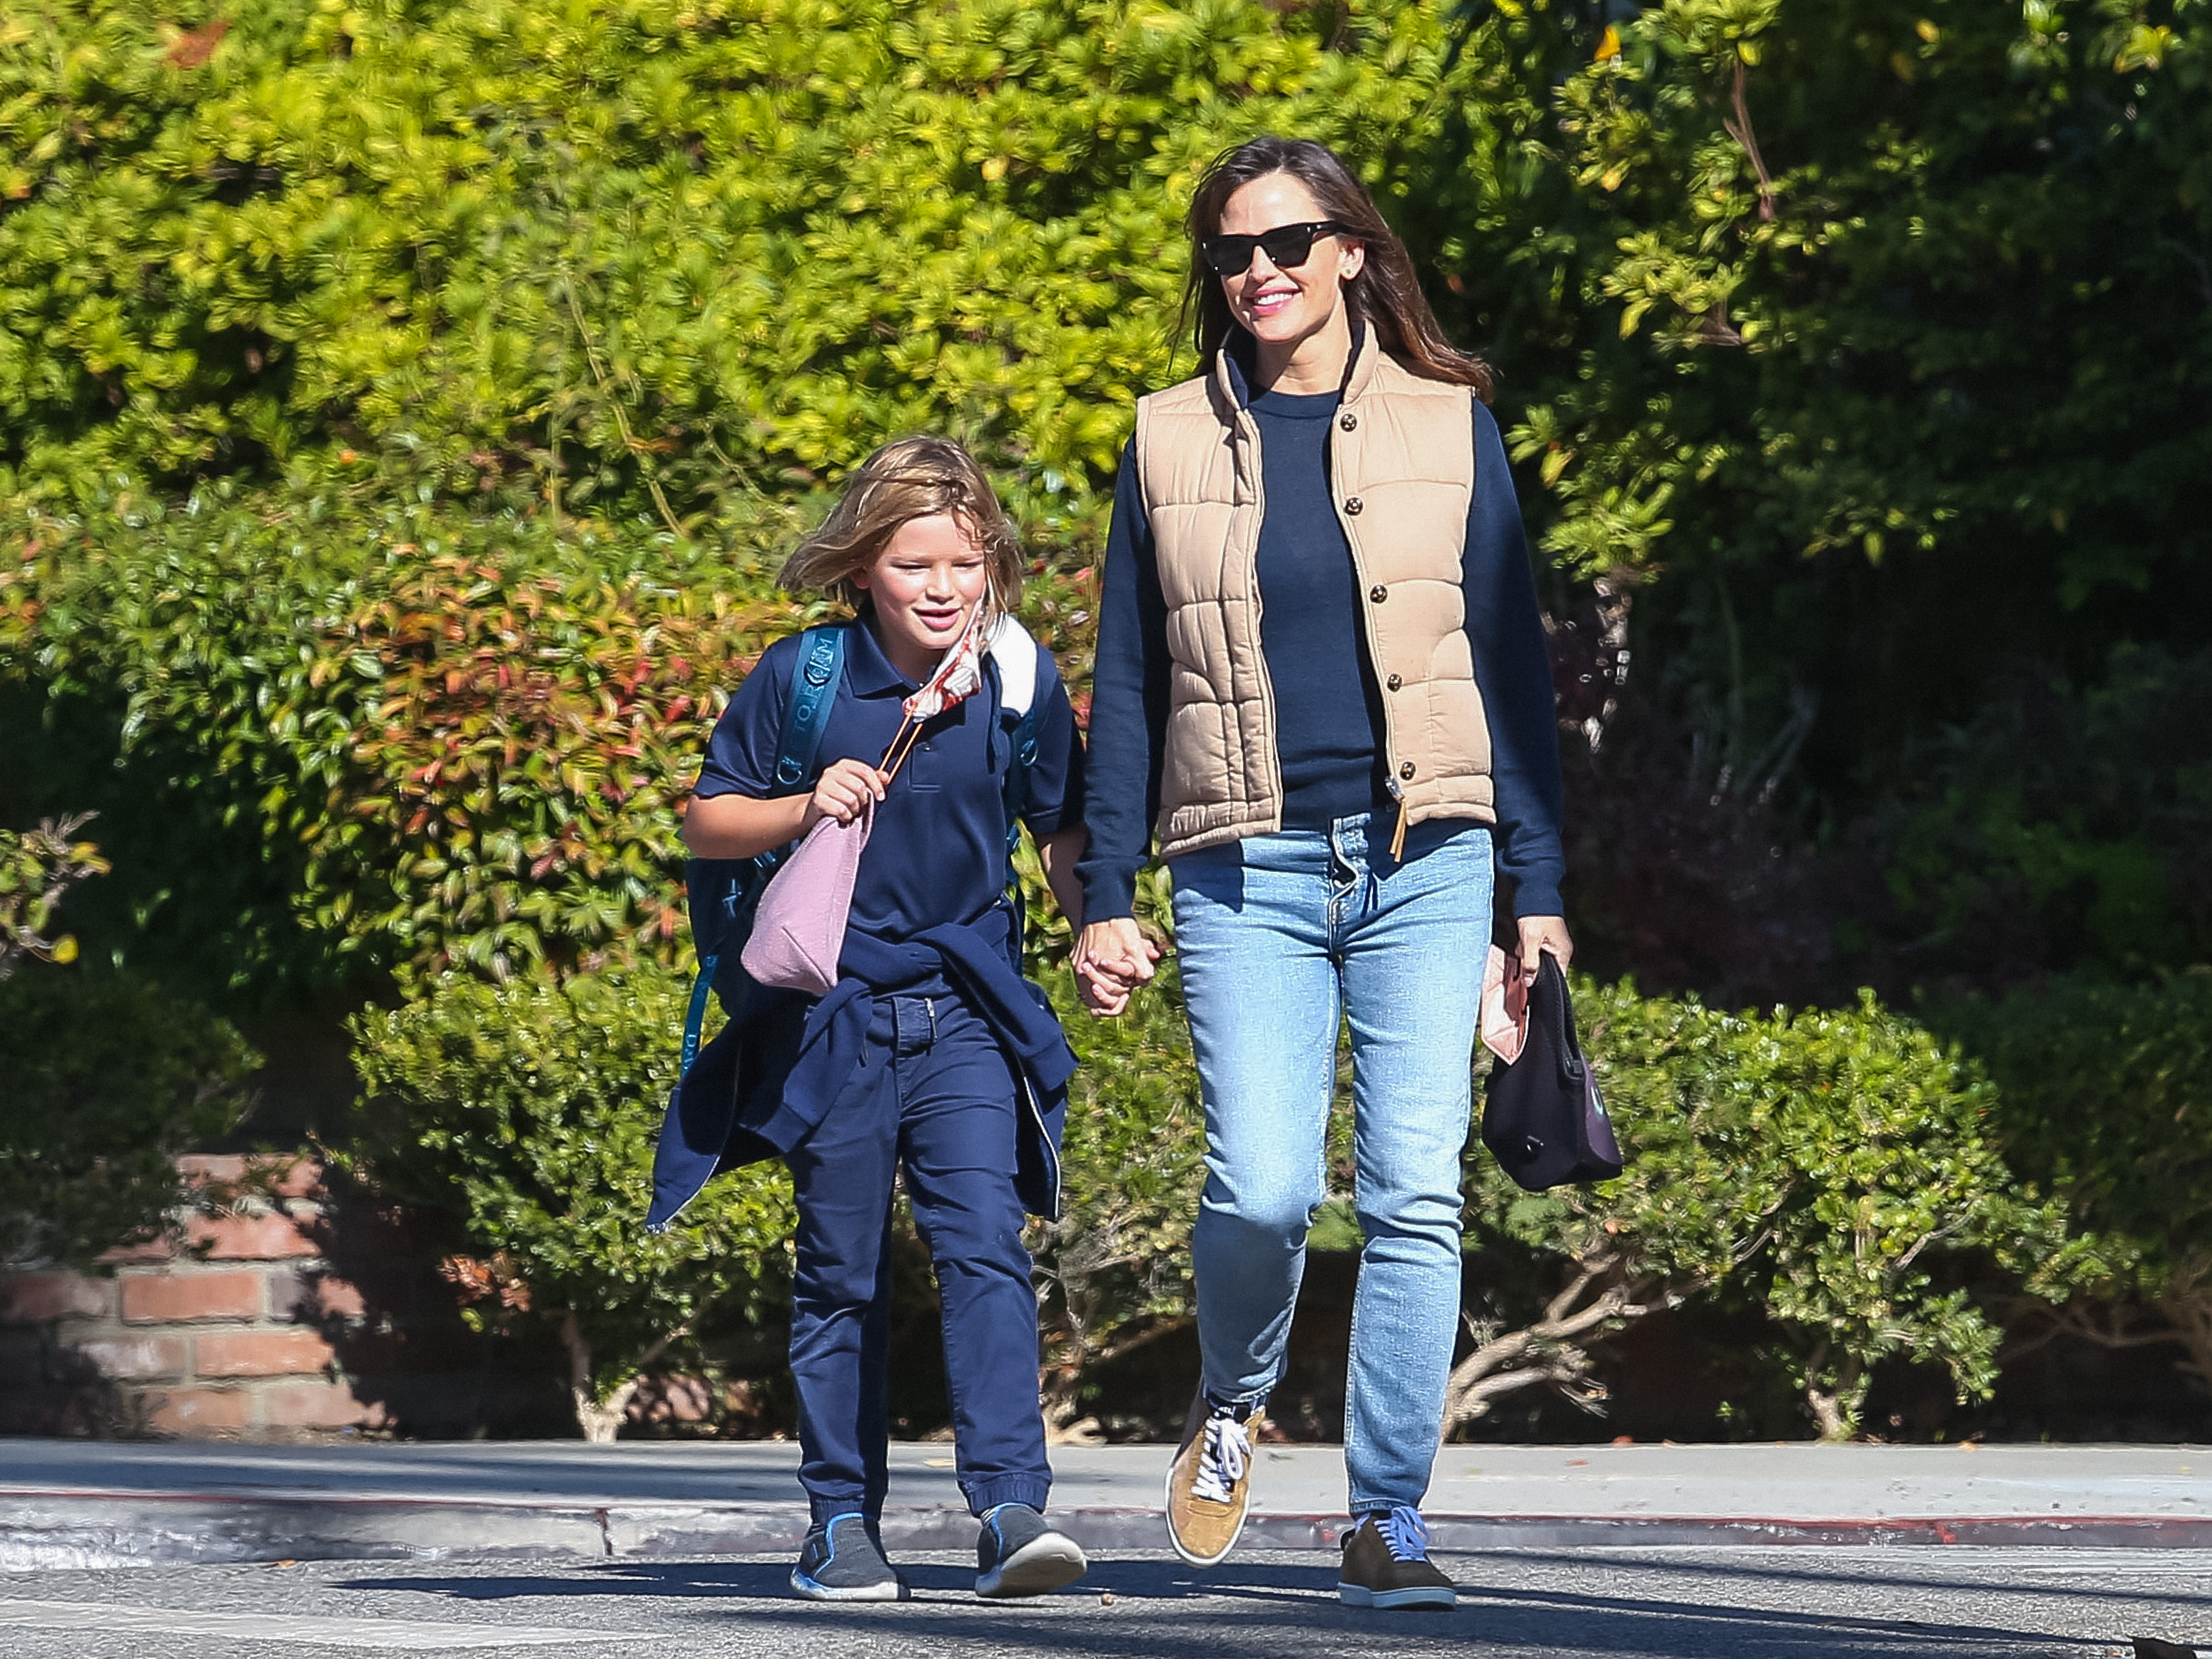 Jennifer Garner Reveals What is in Her Purse After Family Road Trip